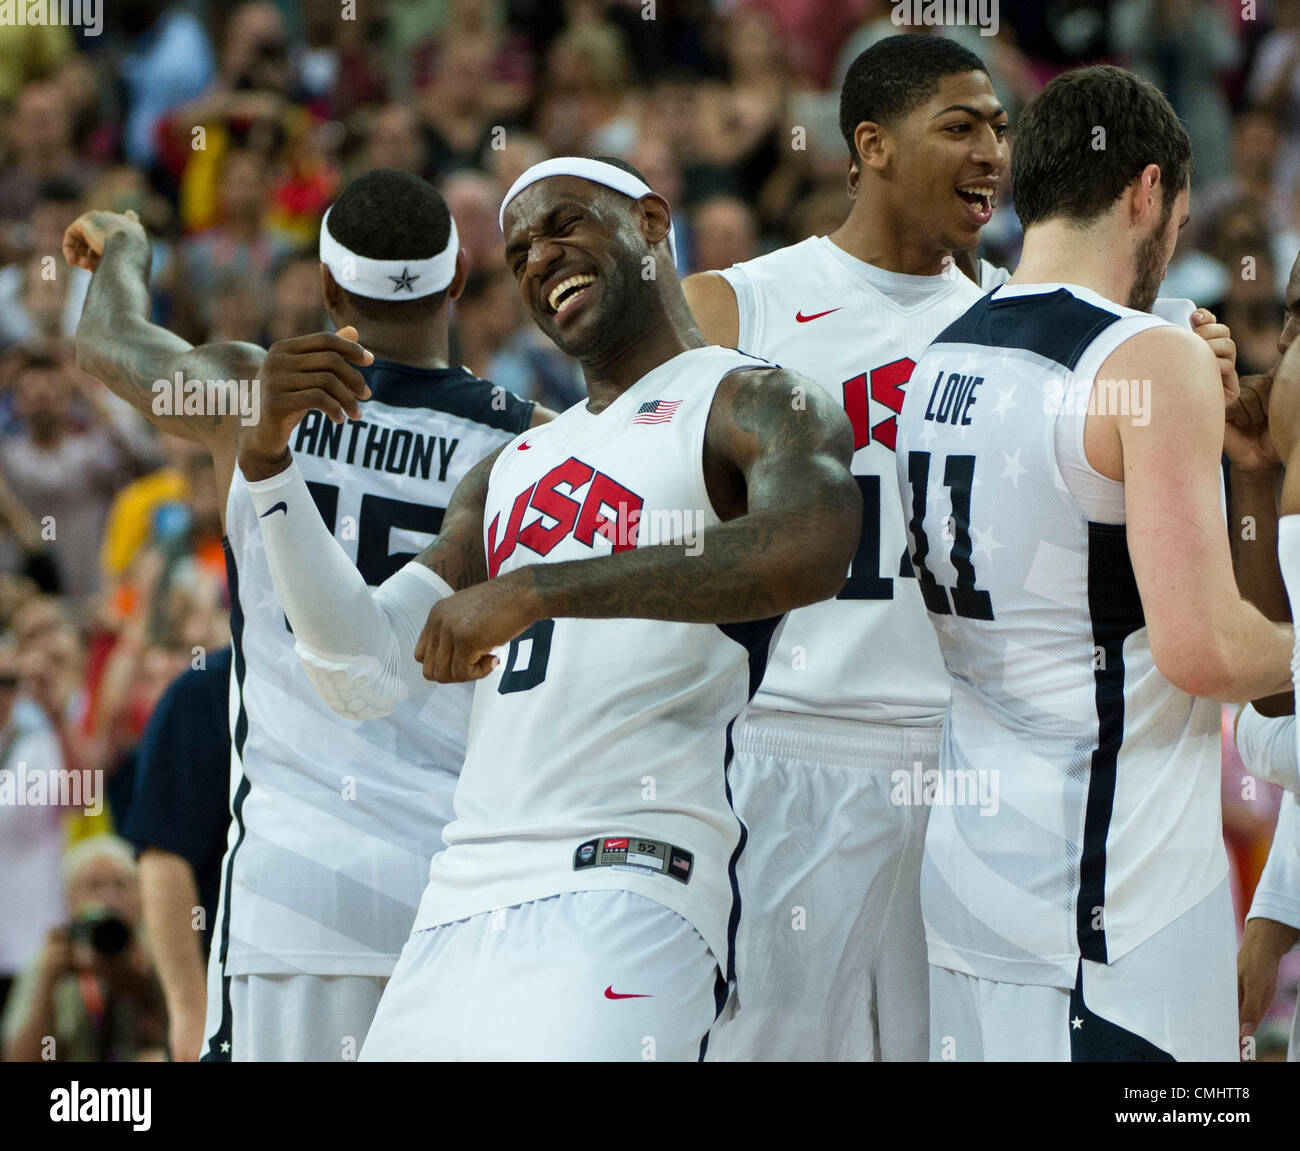 Aug 12 12 London England United Kingdom Lebron James And Team Usa Celebrates Their 107 100 Win One Spain In The Men S Gold Medal Game During The London Olympics 12 At